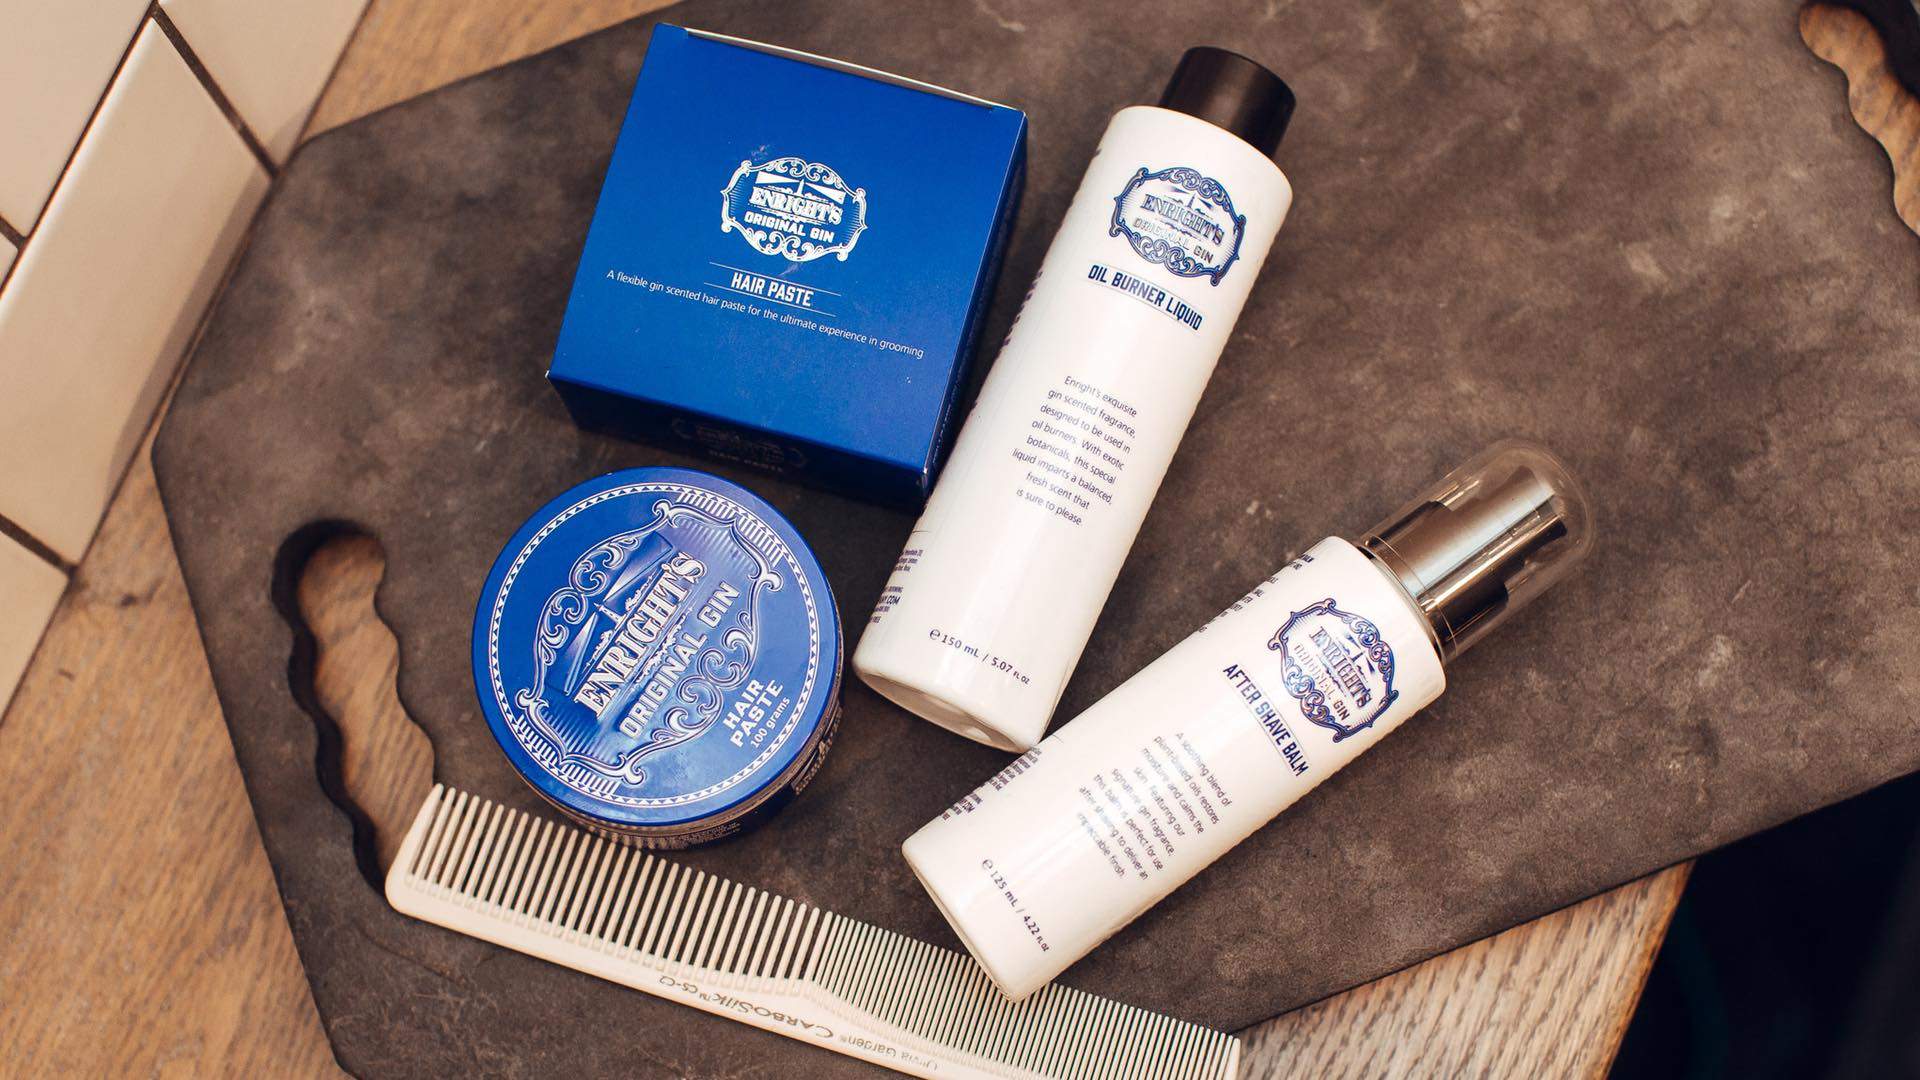 The Barber Shop's Mike Enright Has Launched His Own Line of Gin-Scented Grooming Products